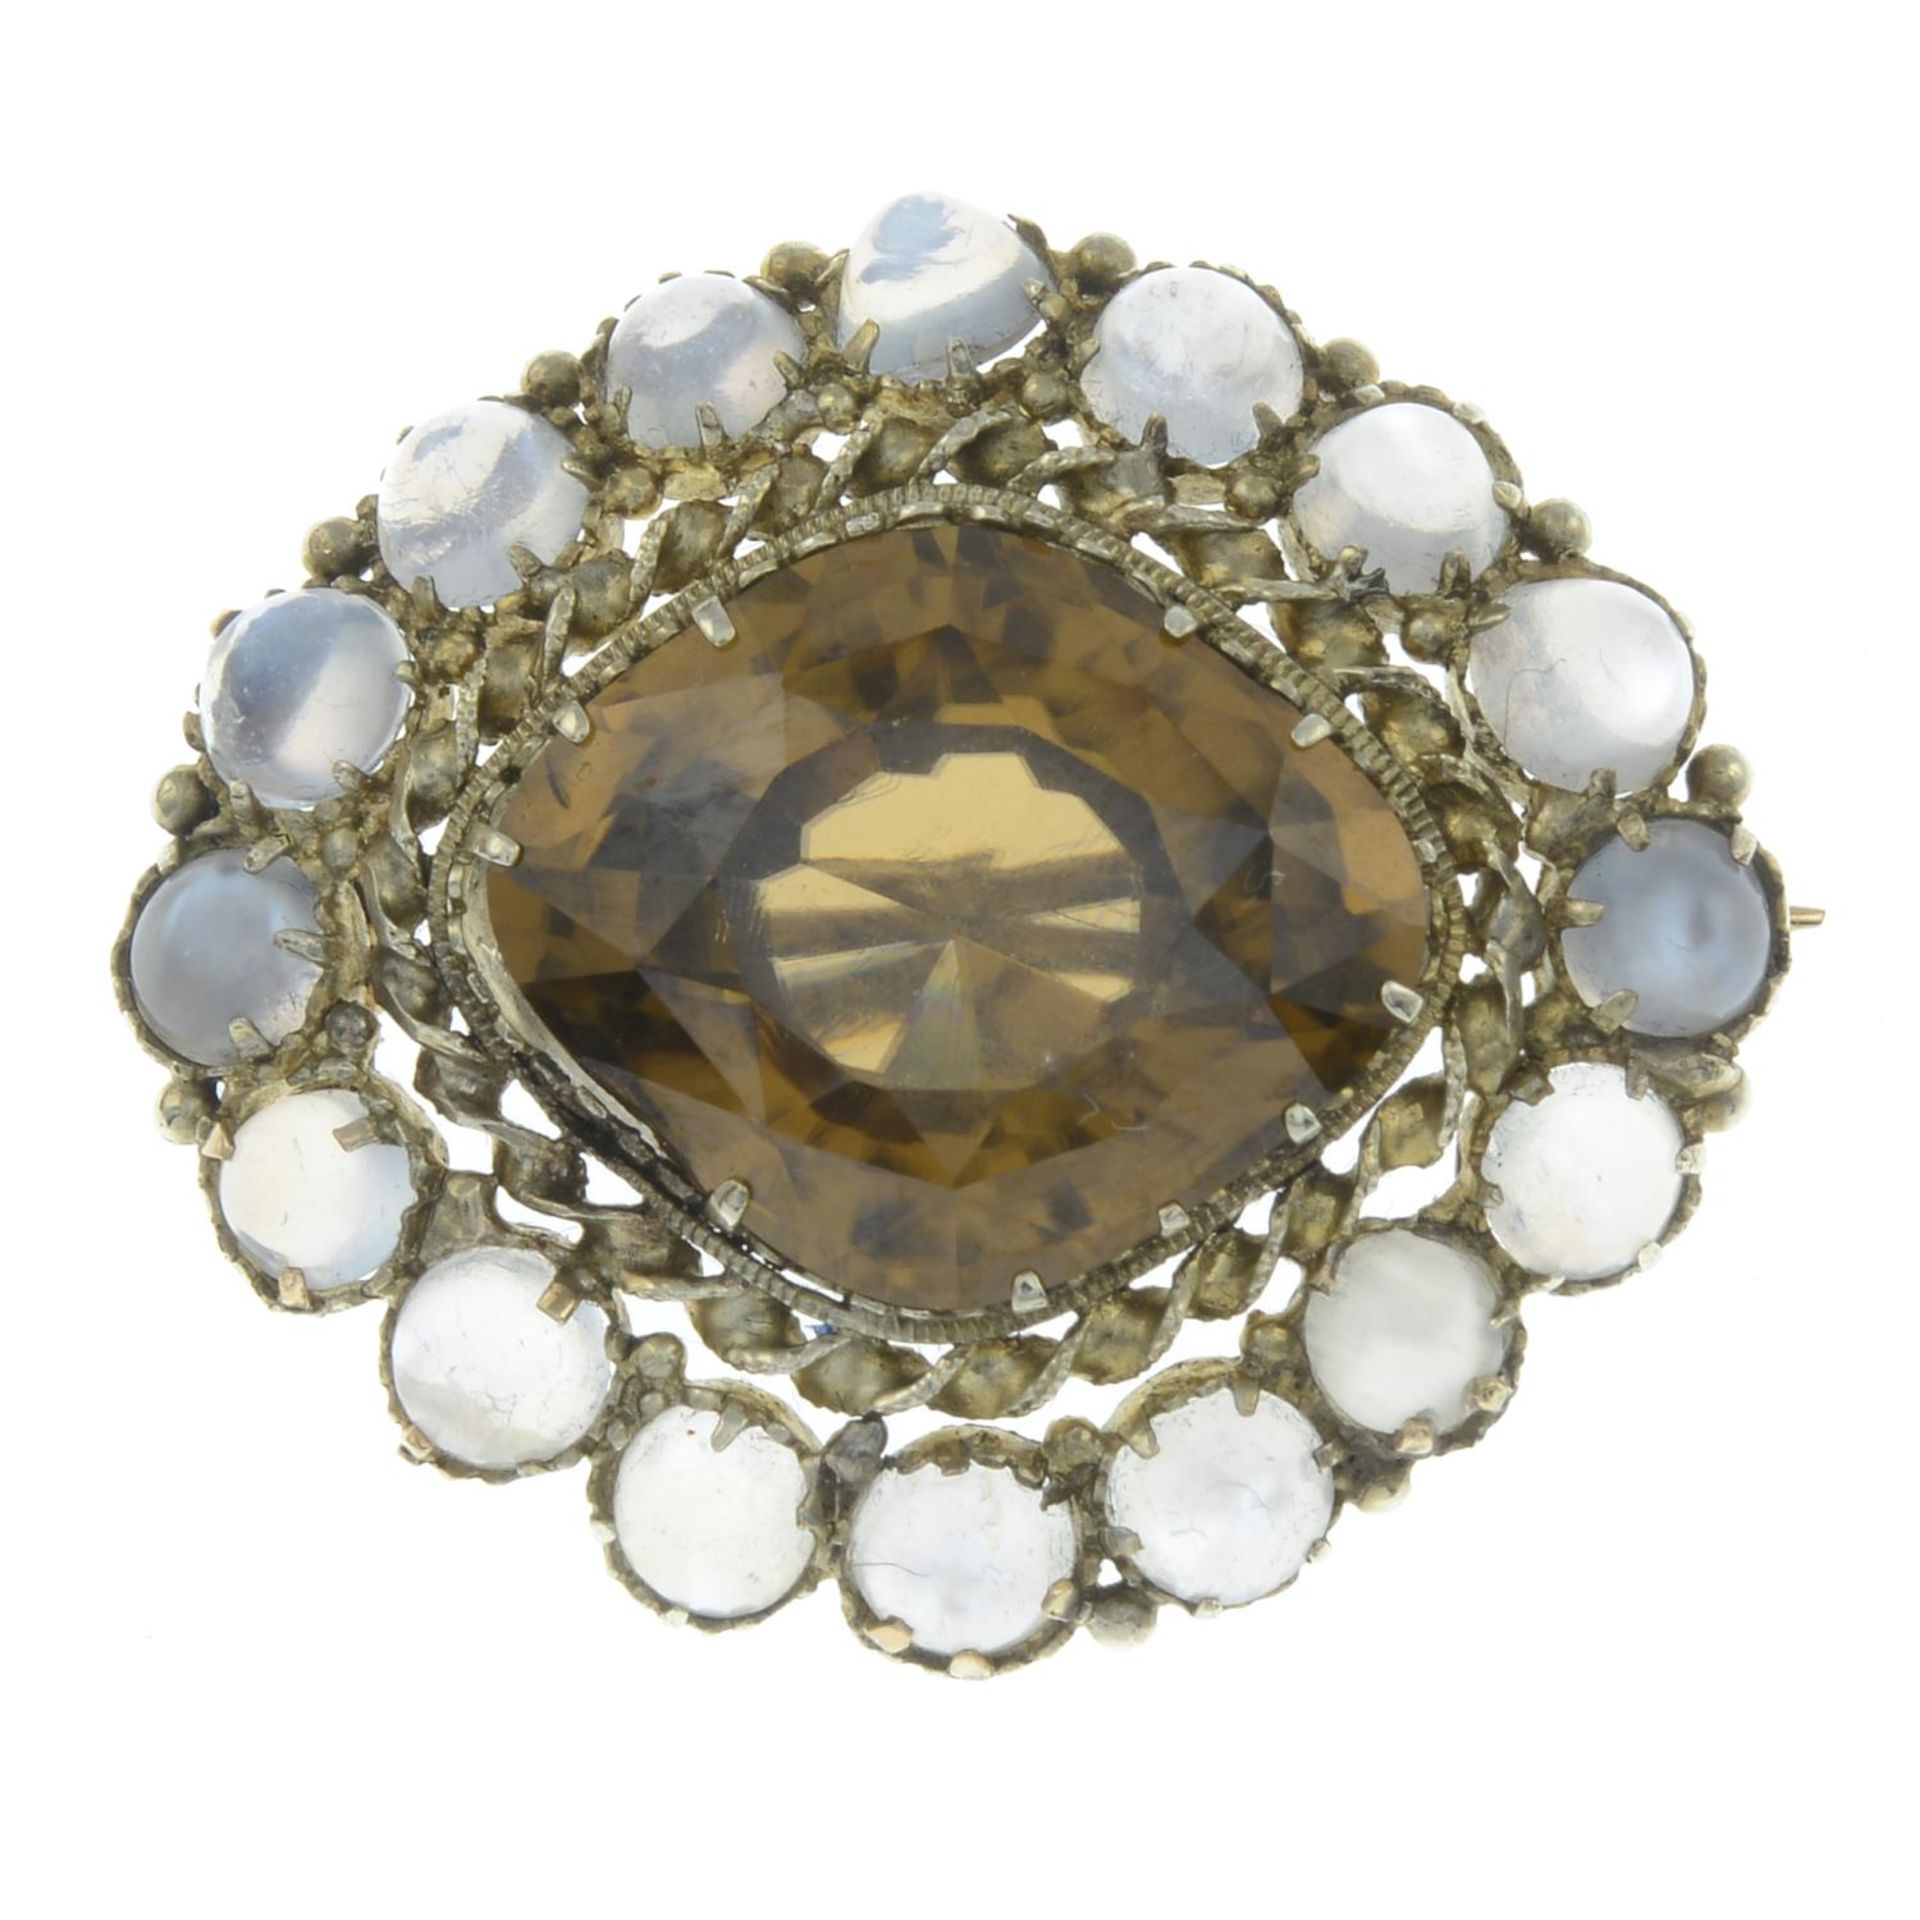 A yellow zircon and moonstone cluster brooch.Length 3.3cms.